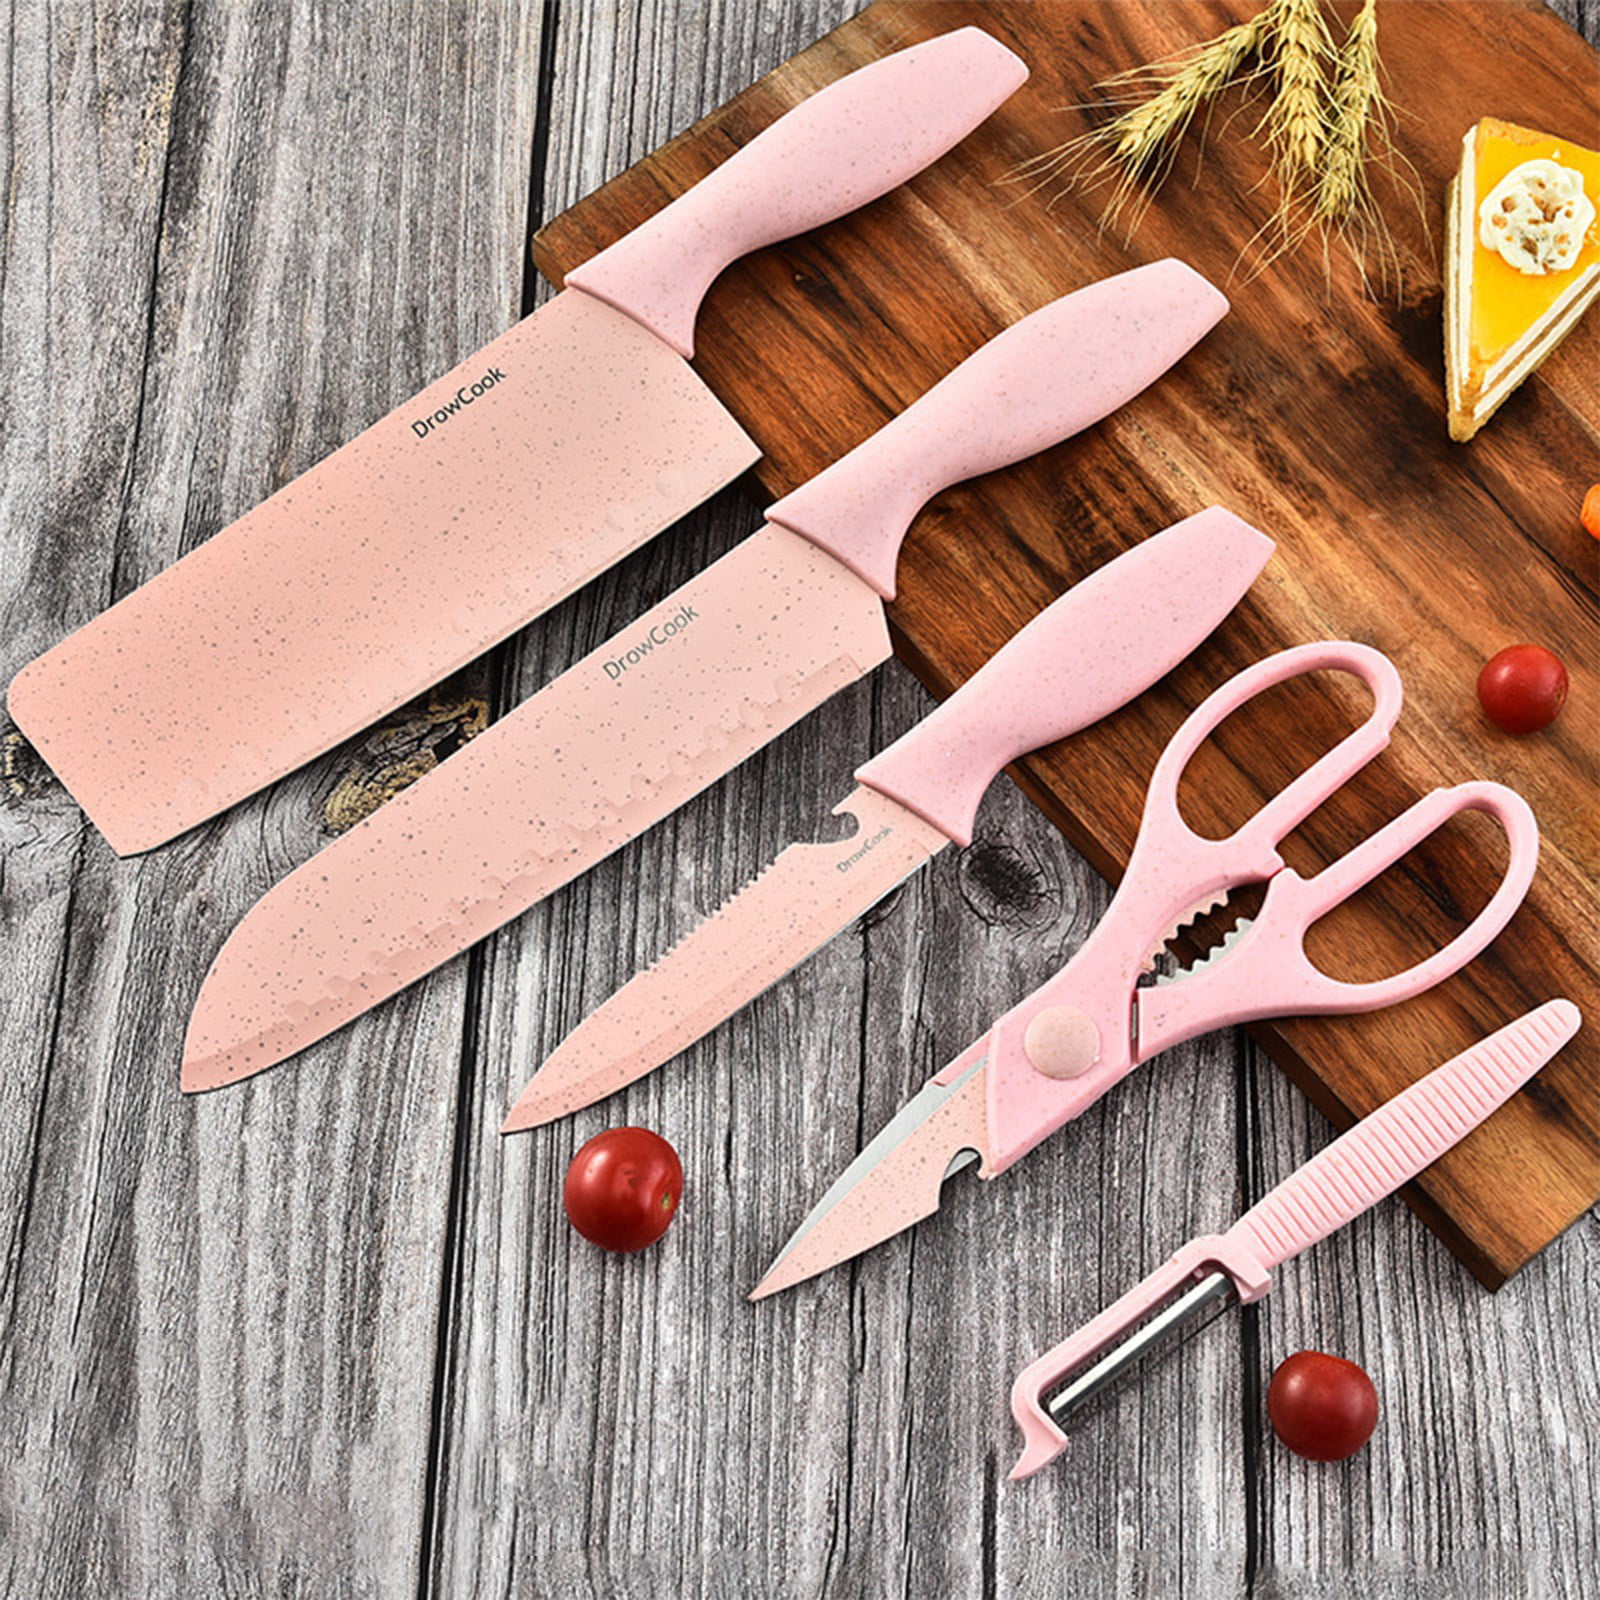 LEISIDY 7 Pieces of Pink Kitchen Knife Set - Non-stick Stainless Steel  Kitchen Knives Set with 1 Scissor & 1 Peeler Stand and Chopping Board with  Gift